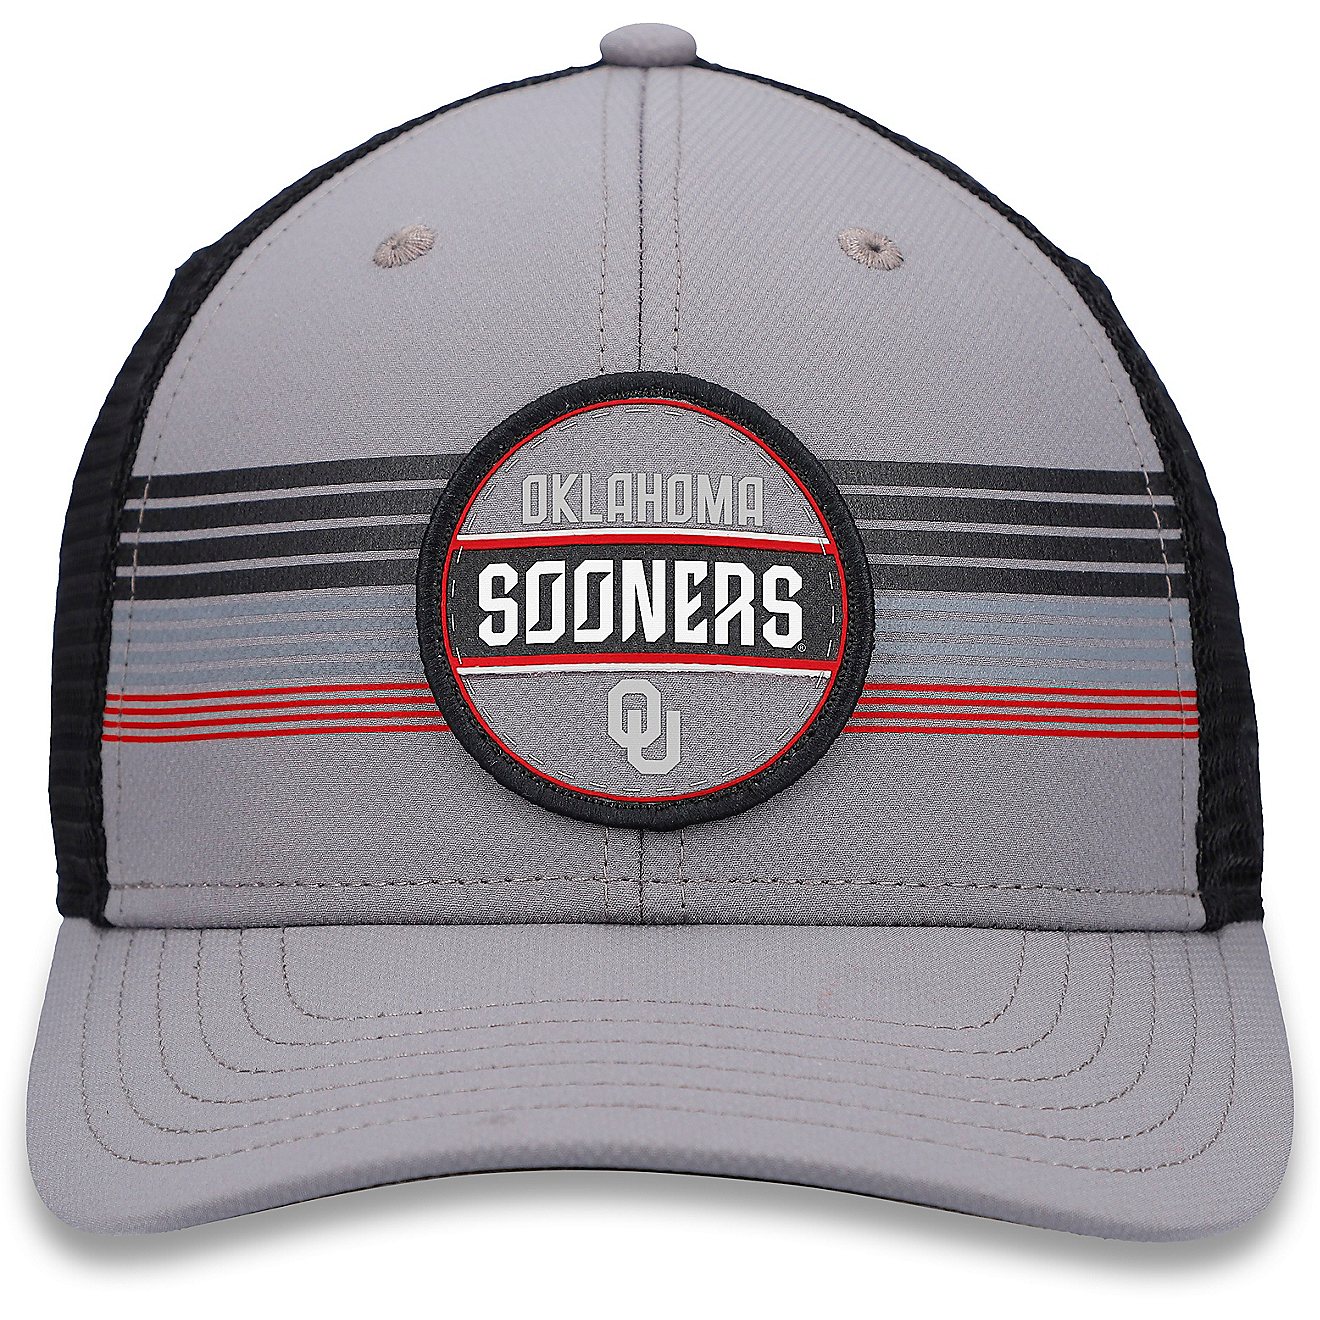 Top of the World University of Oklahoma Legends PGA 2 Tone Snapback Cap                                                          - view number 3